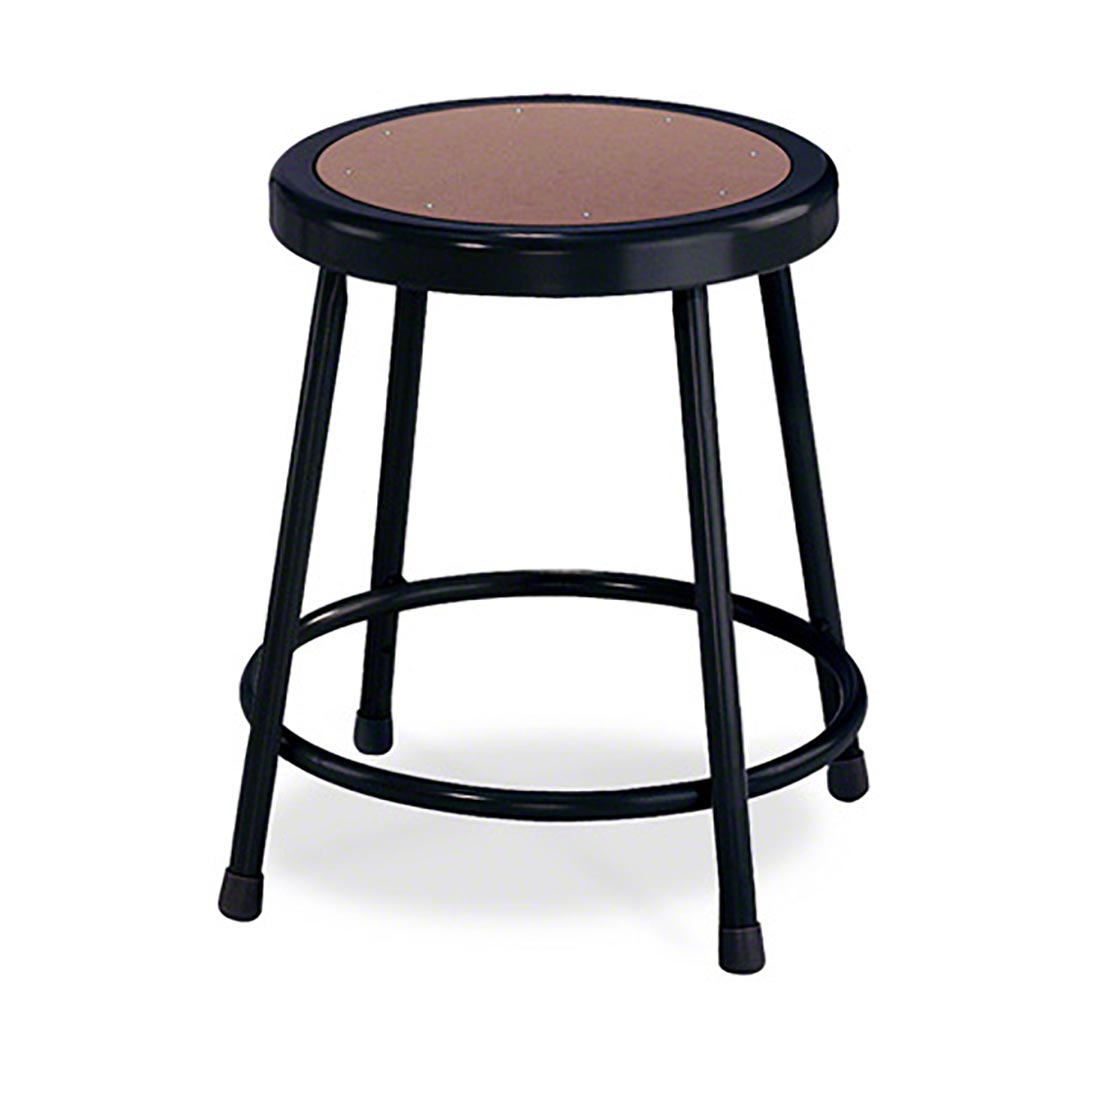 National Public Seating 6622B Square Stool With Backrest Height 22"Black 